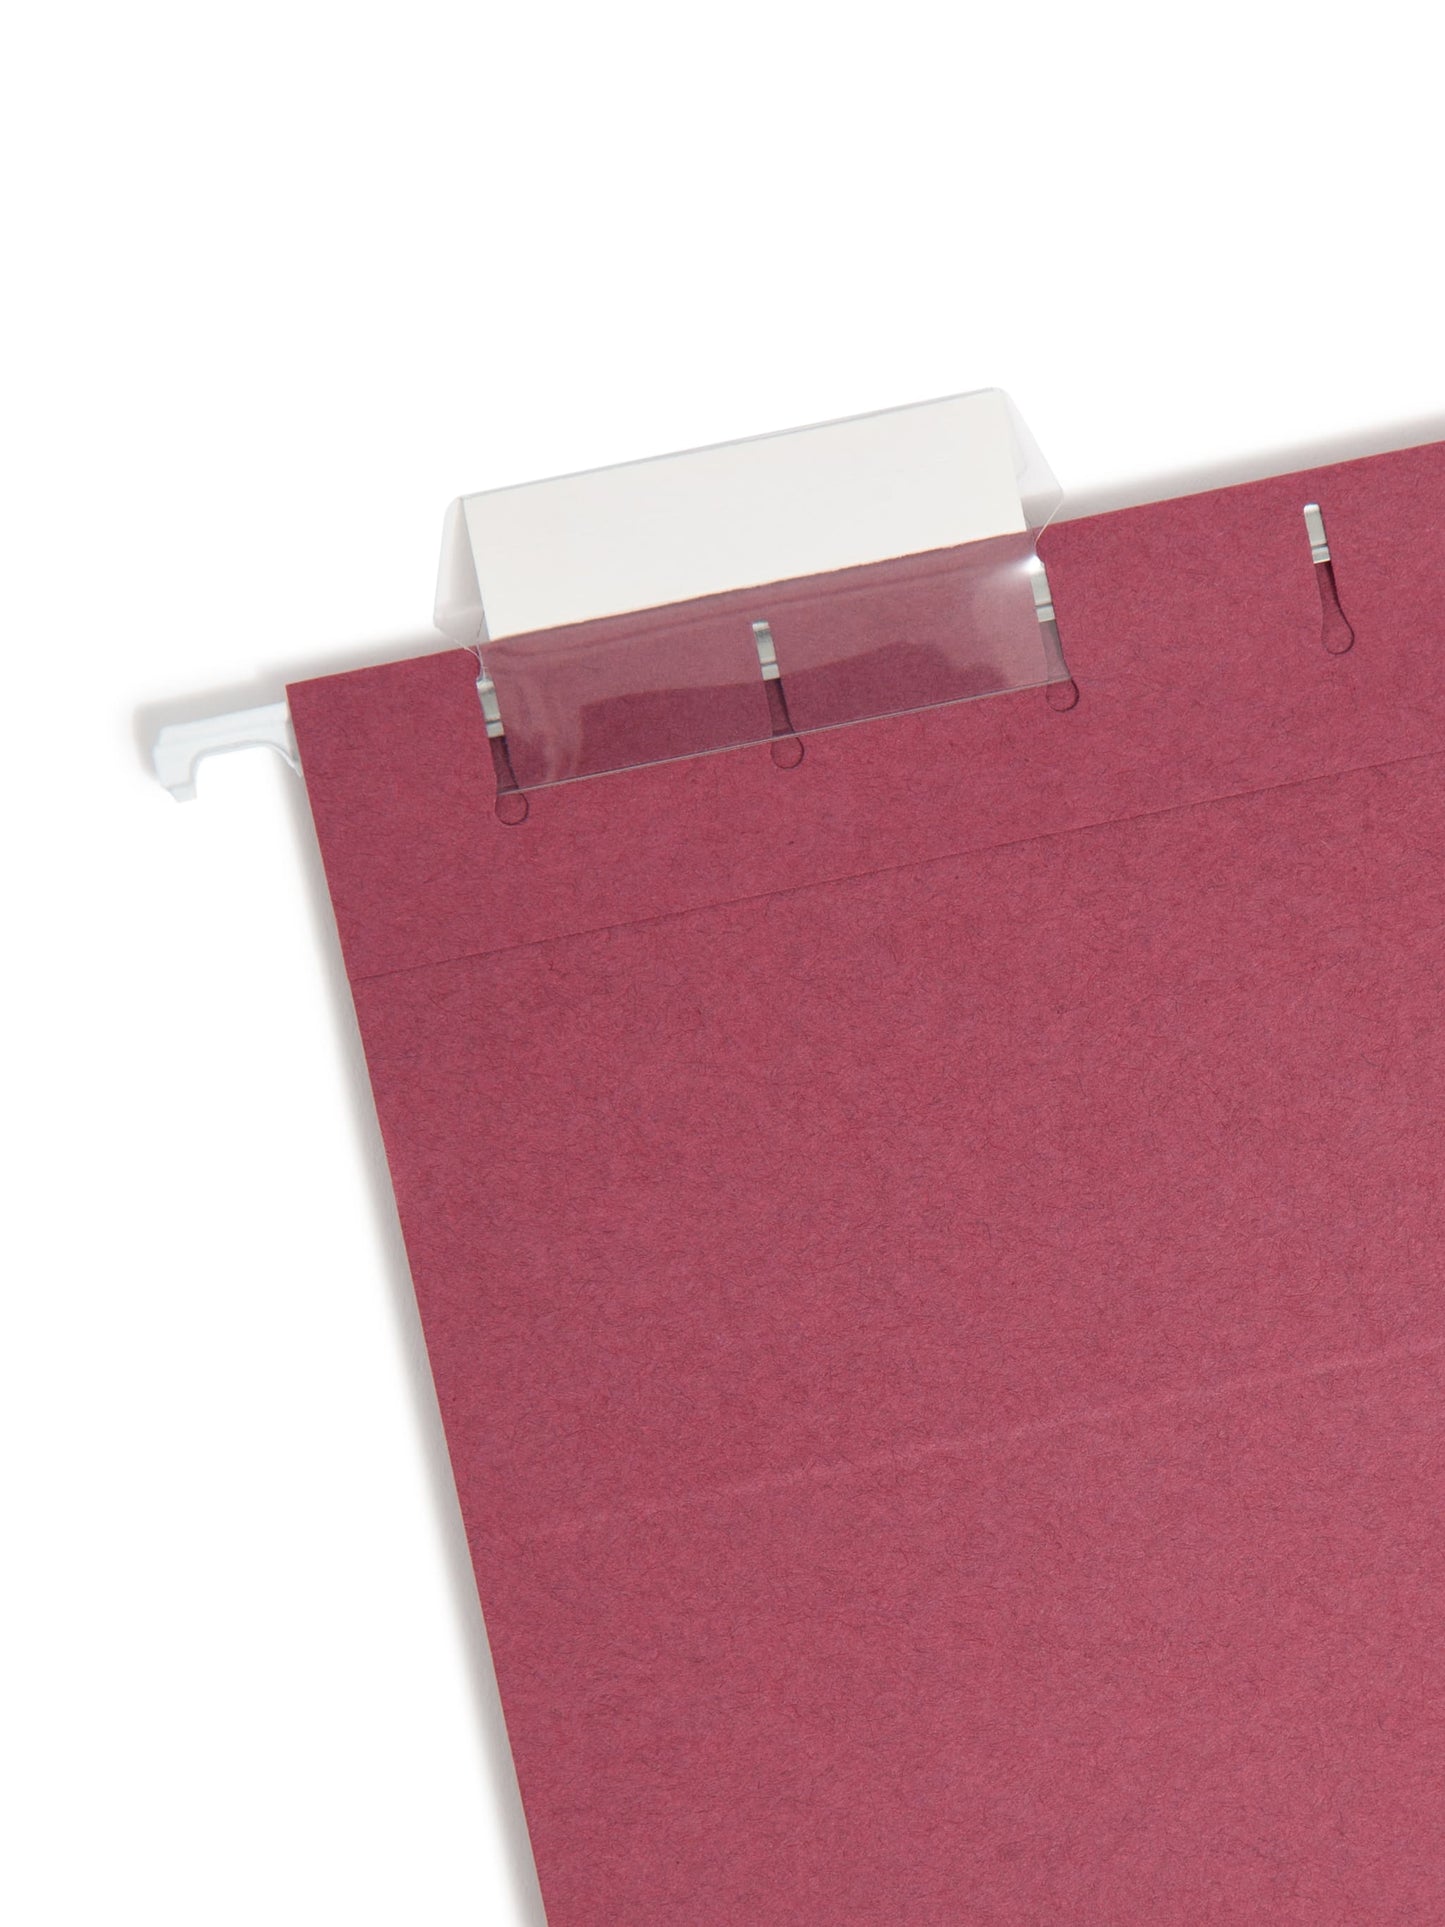 Standard Hanging File Folders with 1/5-Cut Tabs, Maroon Color, Letter Size, Set of 25, 086486640732